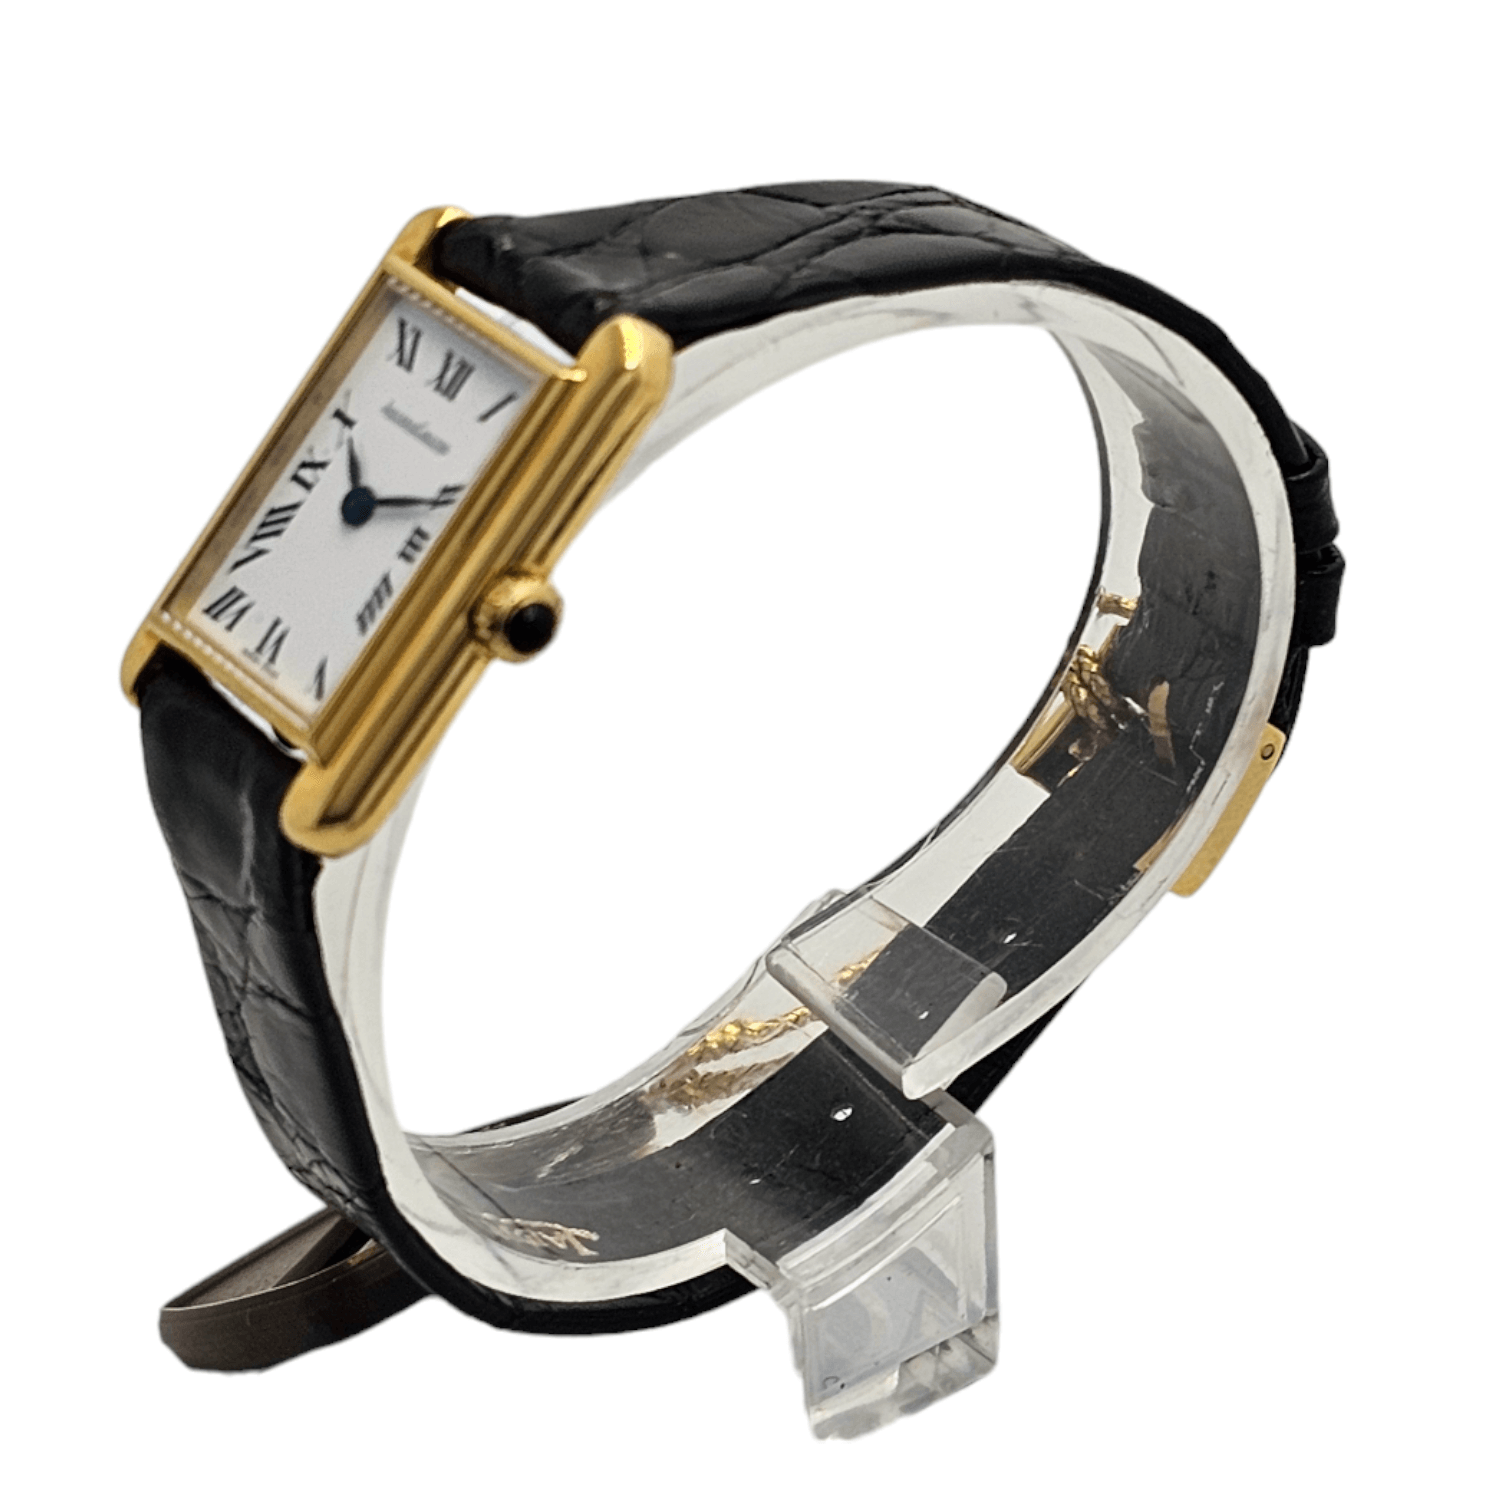 Jaeger-LeCoultre Vintage Lady Gold Ref. 1496635 - ON6024 - LuxuryInStock